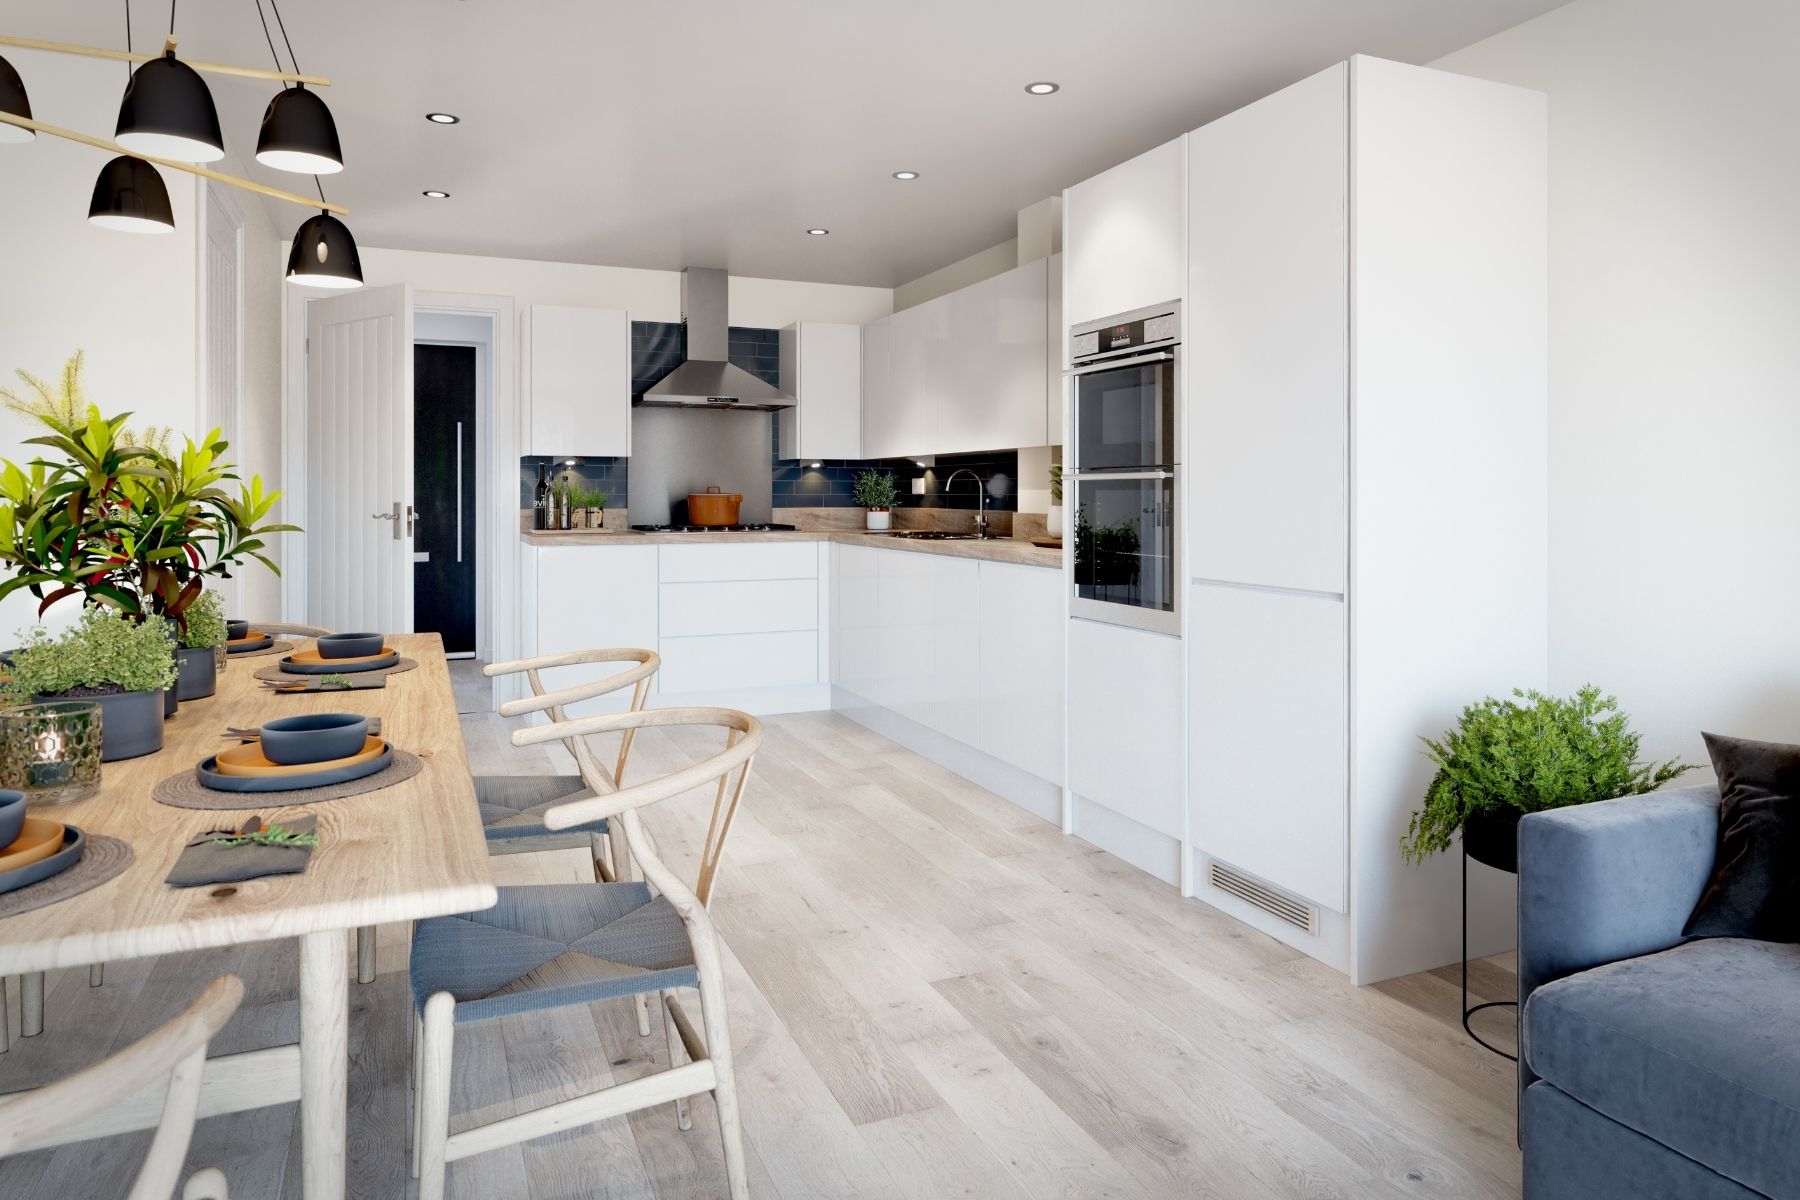 Interior design – Millbrook Park by Taylor Wimpey